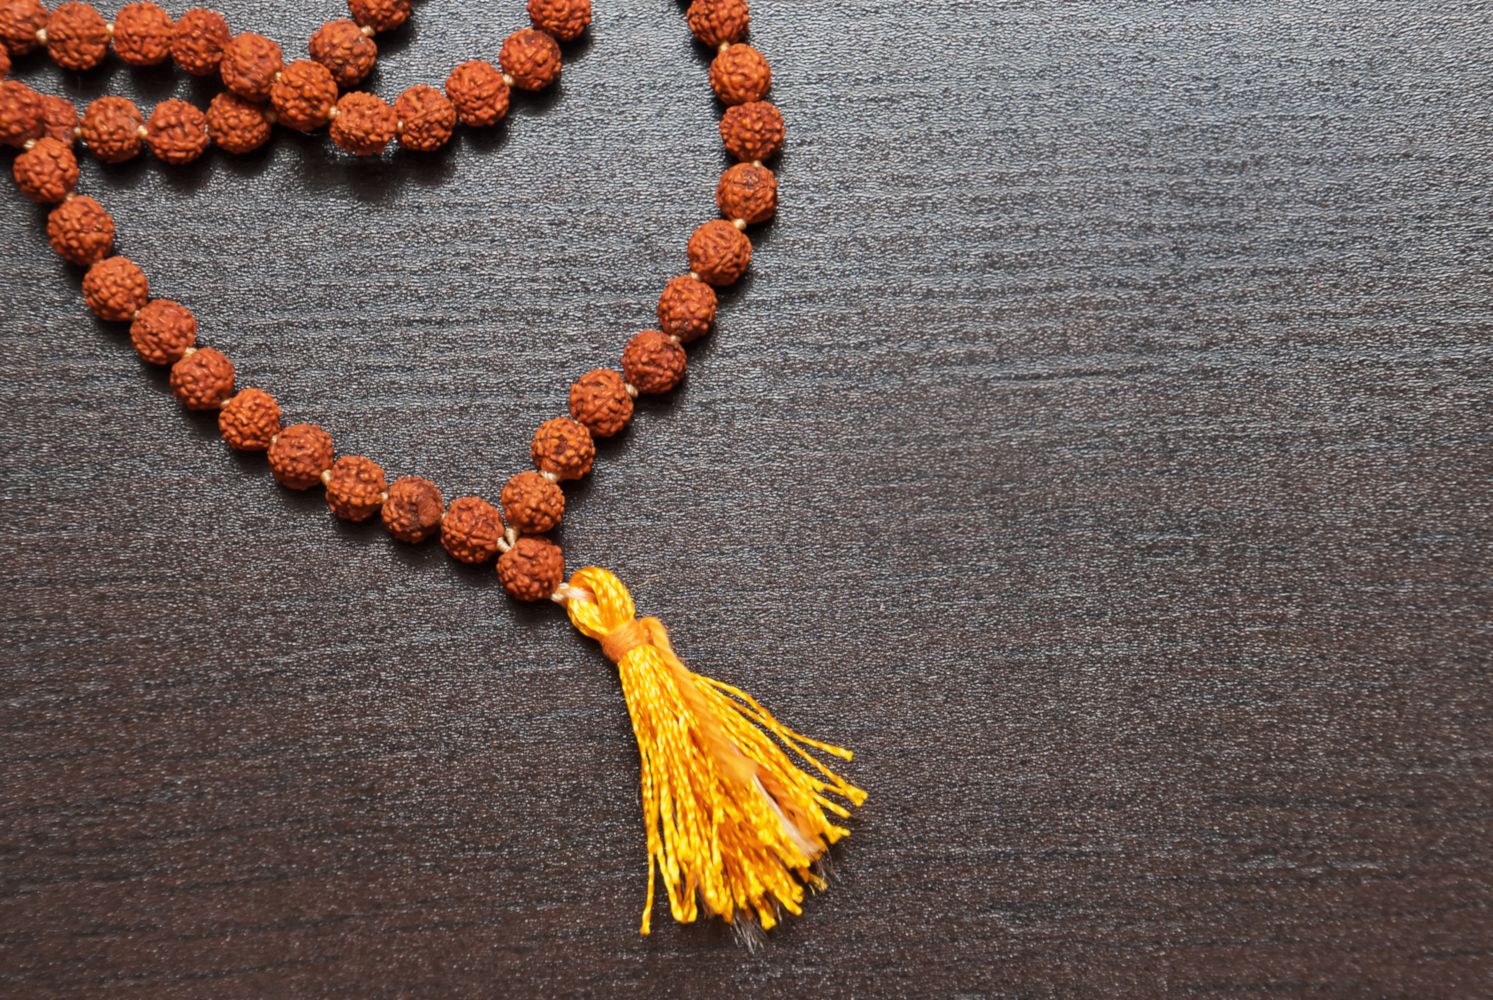 How to Use Mala Beads: A Step-by-Step Guide to Mala Meditation - YOGA  PRACTICE